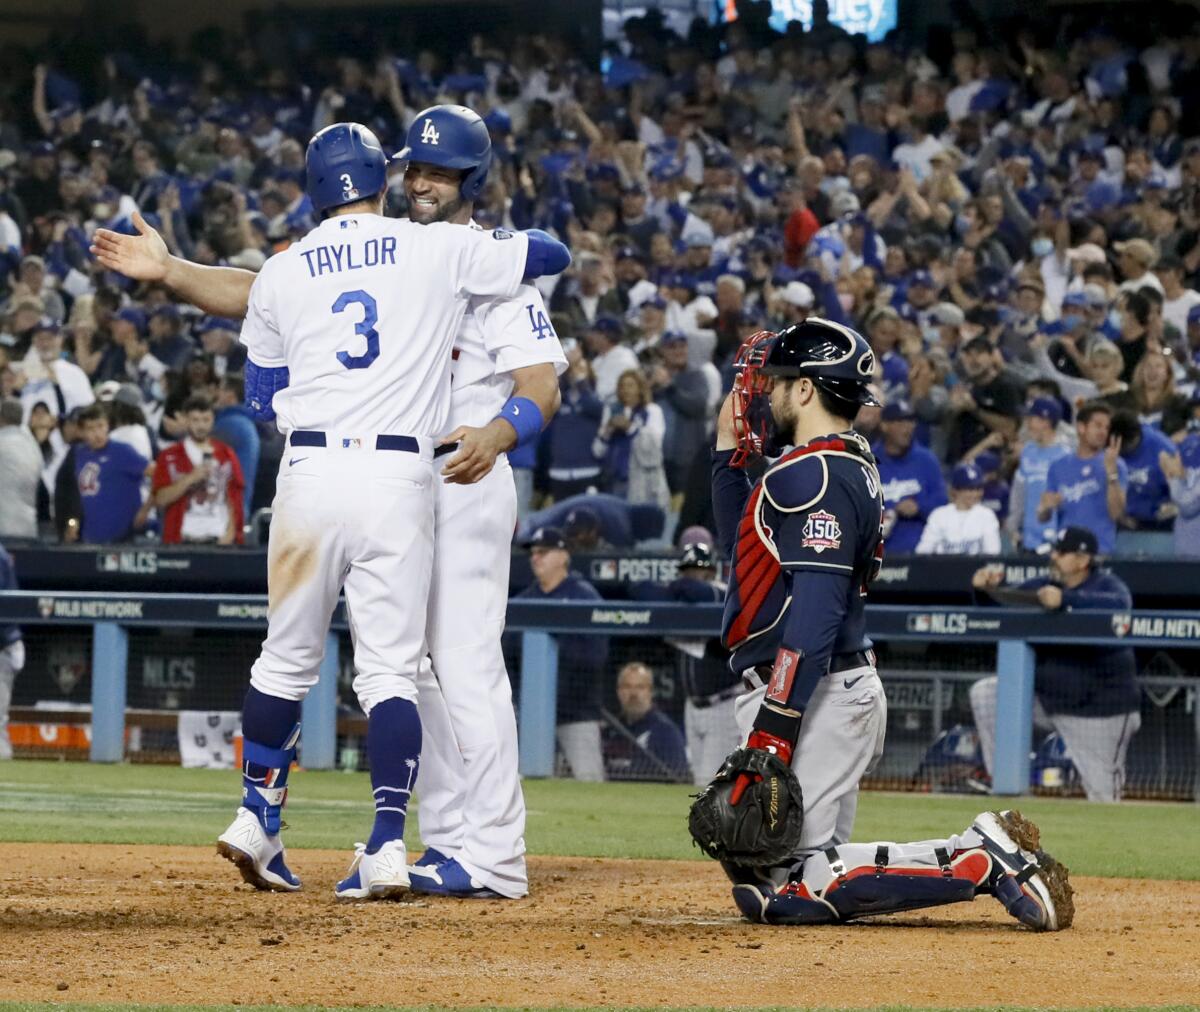 Chris Taylor gets a hug from Albert Pujols after his home run in the fifth inning.